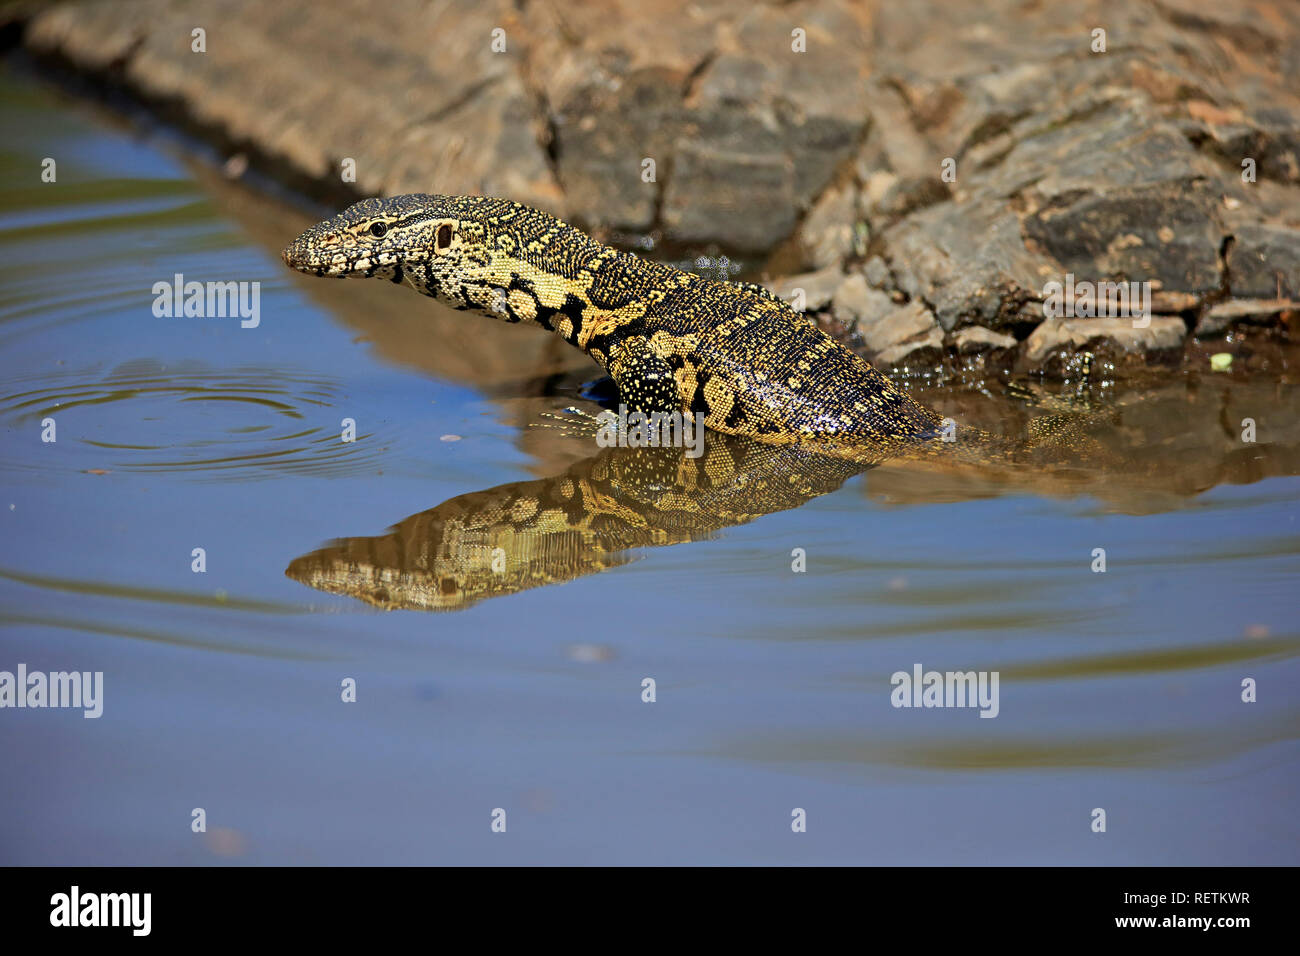 Nile Monitor, adult in water, Kruger Nationalpark, South Africa, Africa, (Varanus niloticus) Stock Photo